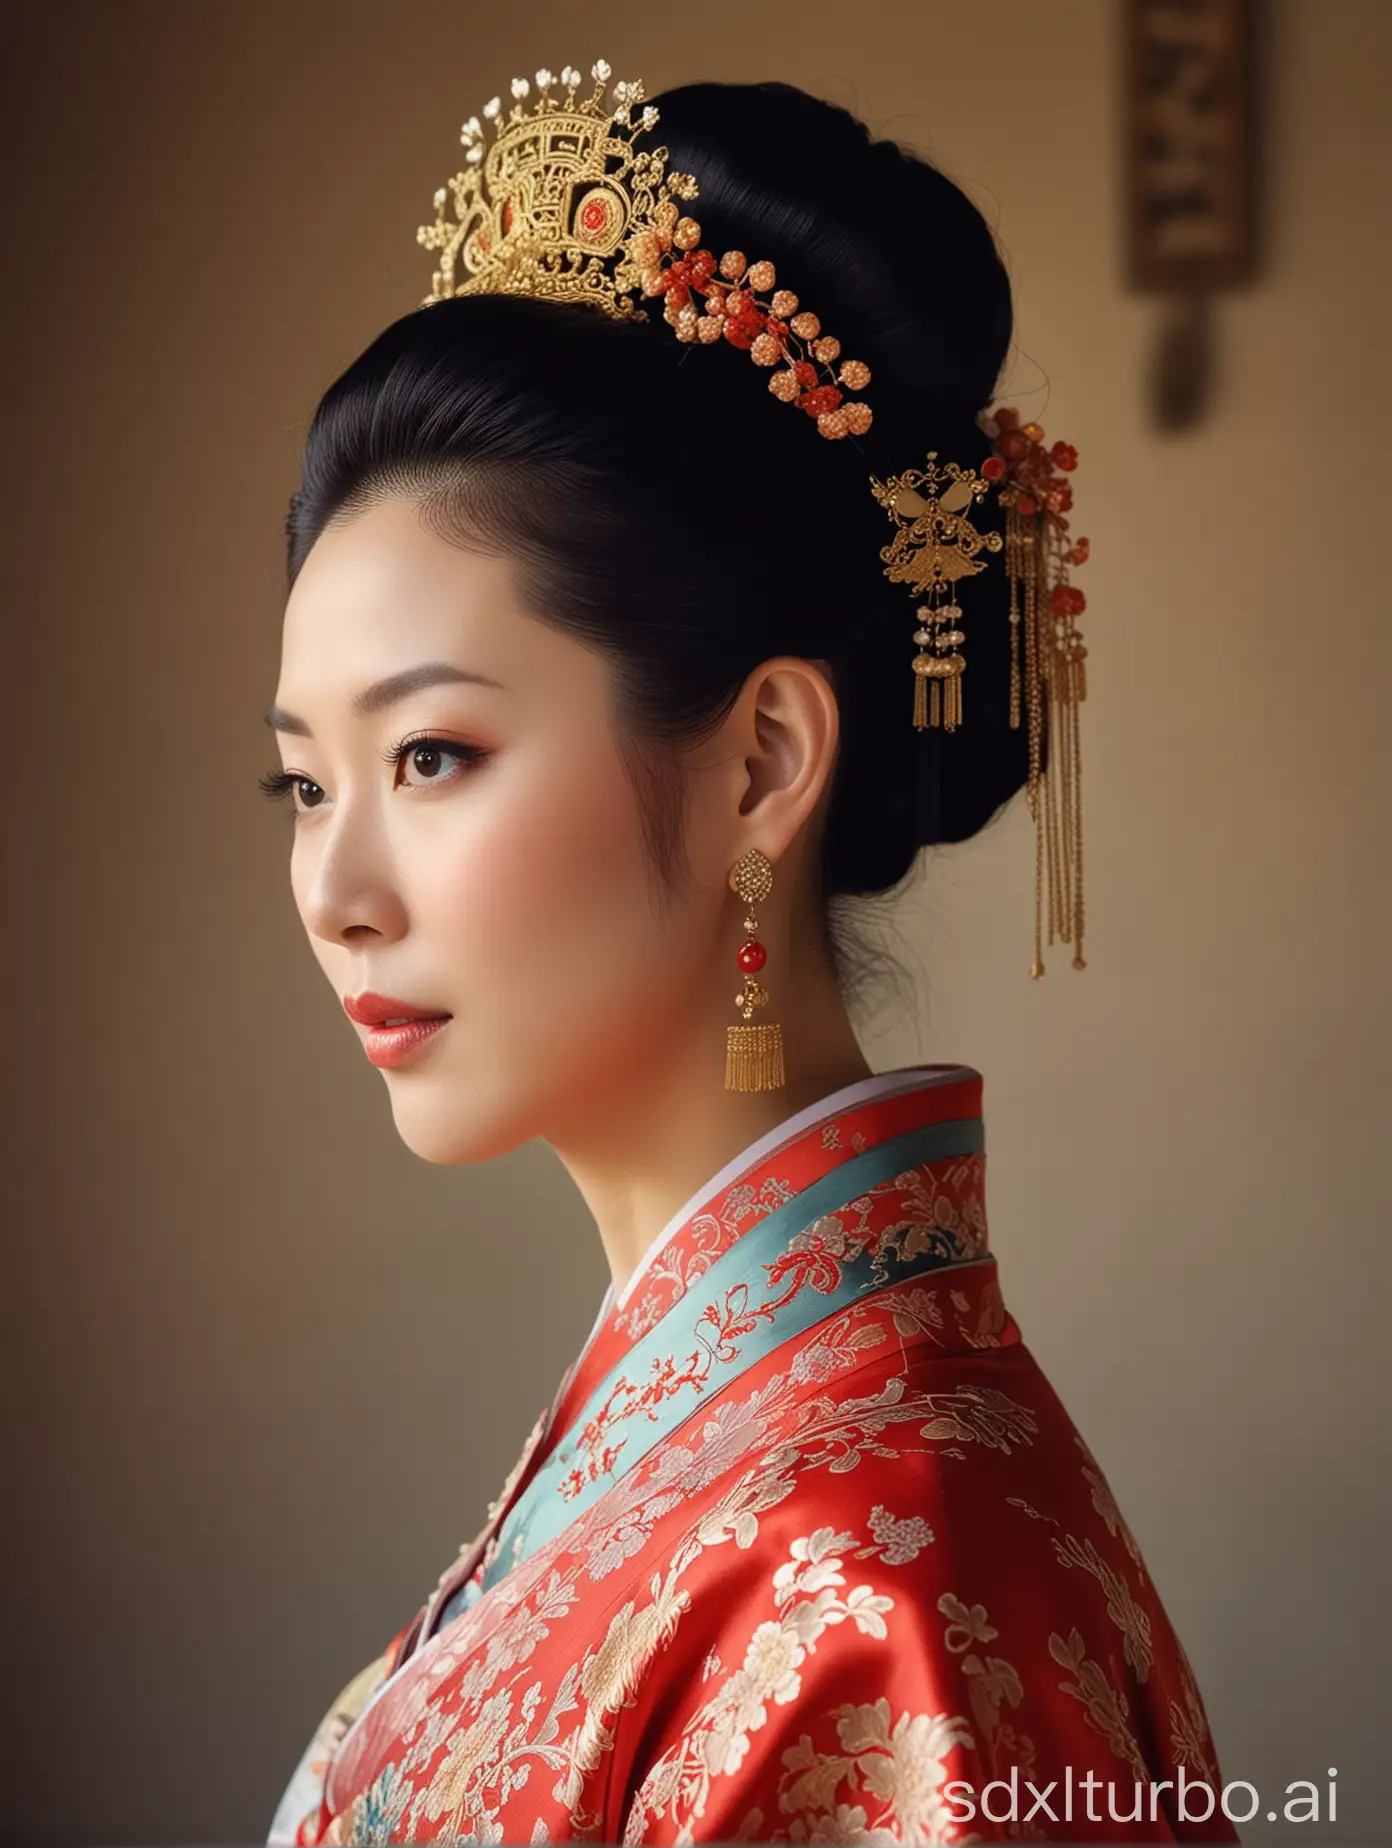 With a queenly noble temperament, a dignified countenance, clad in traditional Chinese clothing, hair piled high.